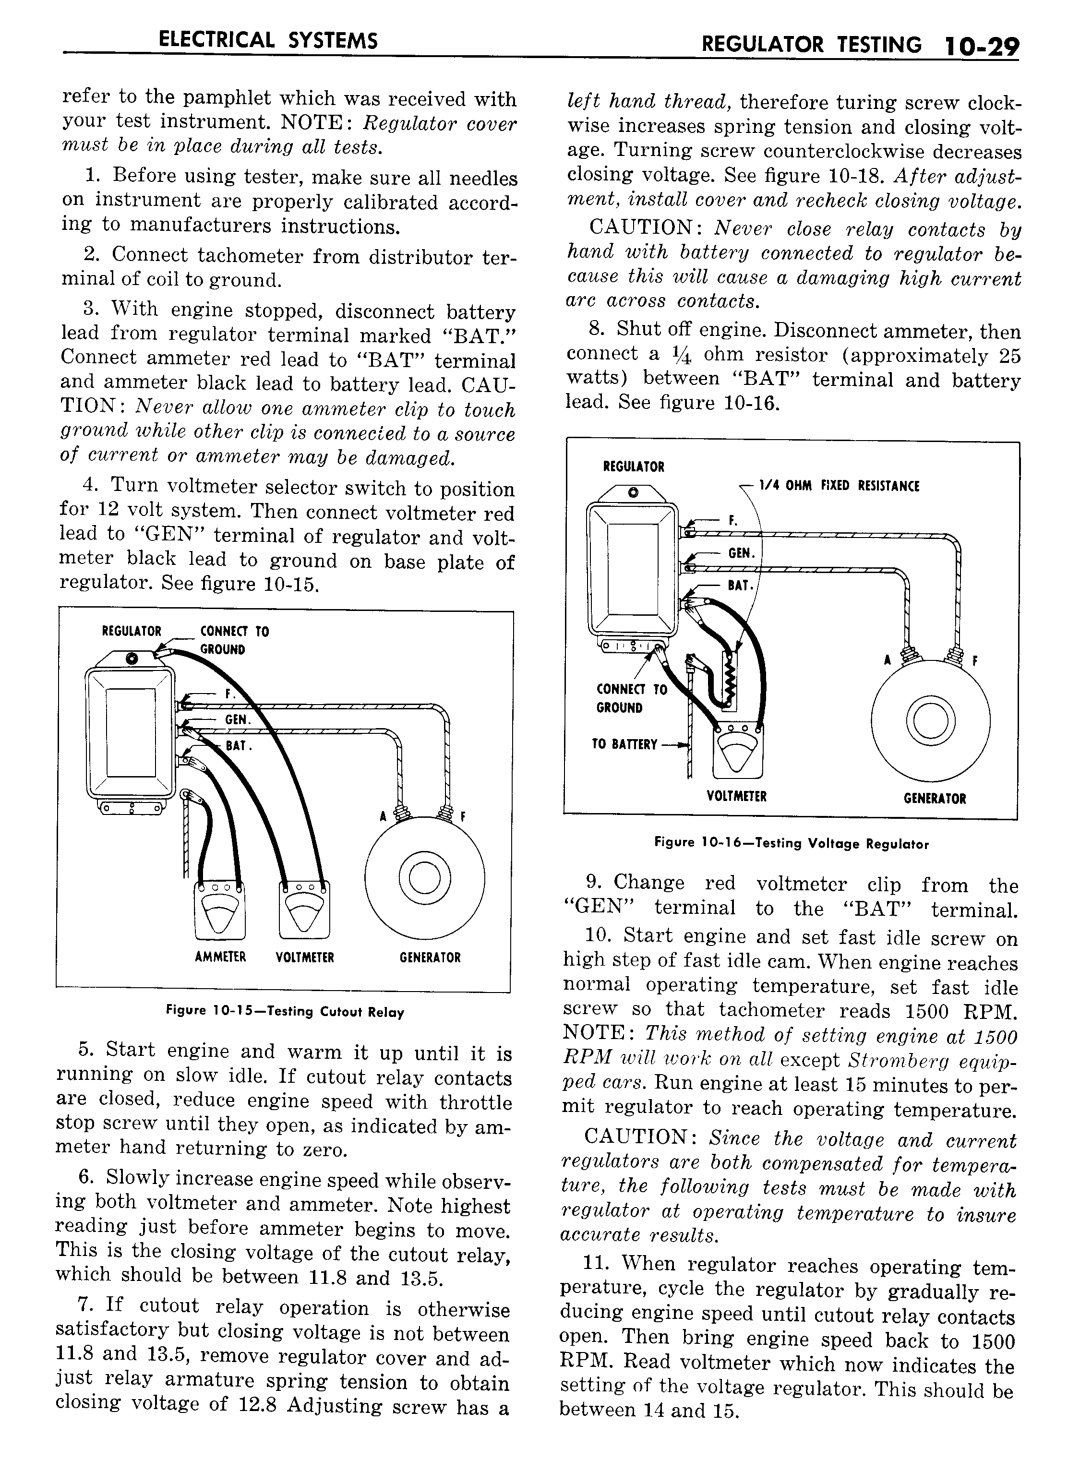 n_11 1957 Buick Shop Manual - Electrical Systems-029-029.jpg